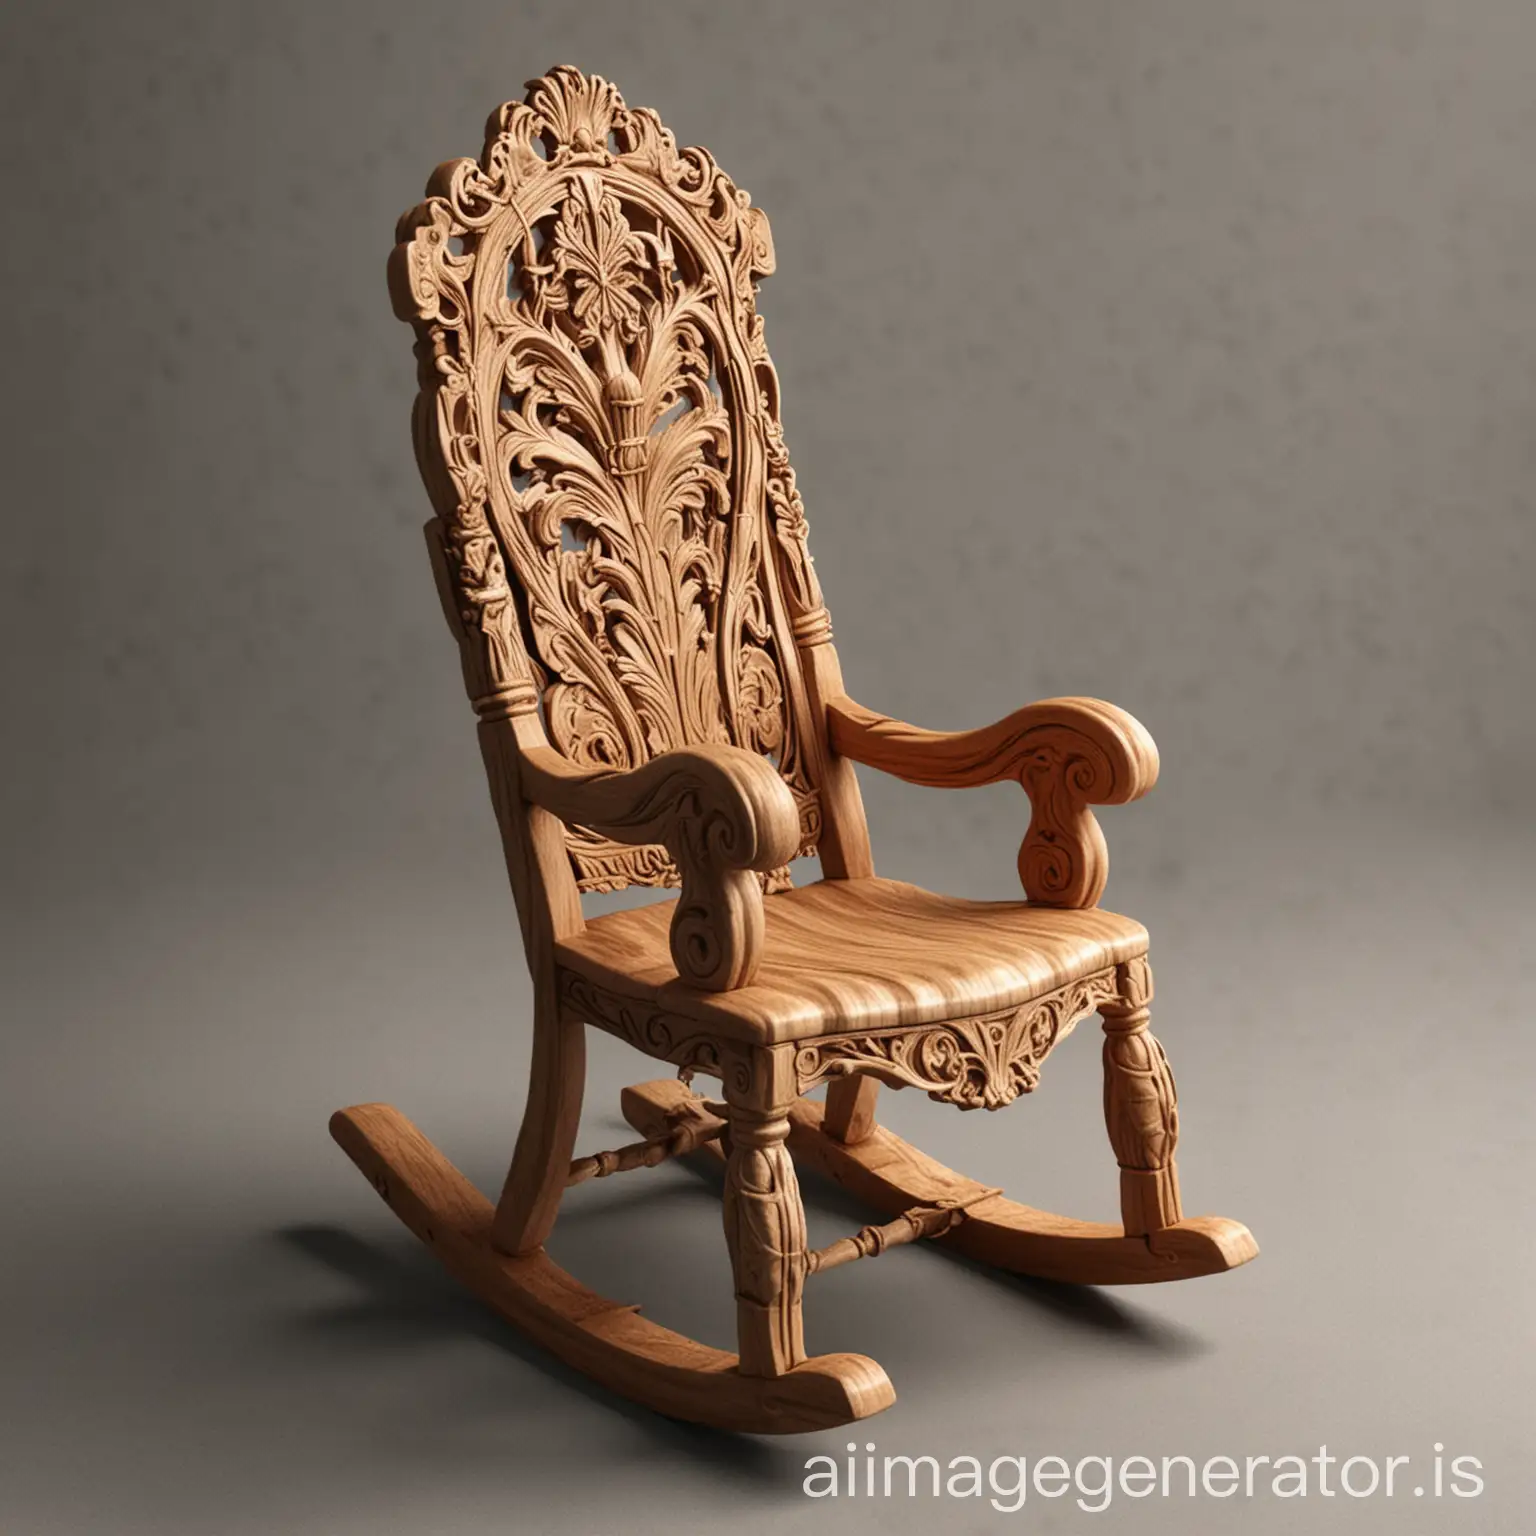 Free-3D-Relief-Model-of-Carved-Rocking-Chair-Design